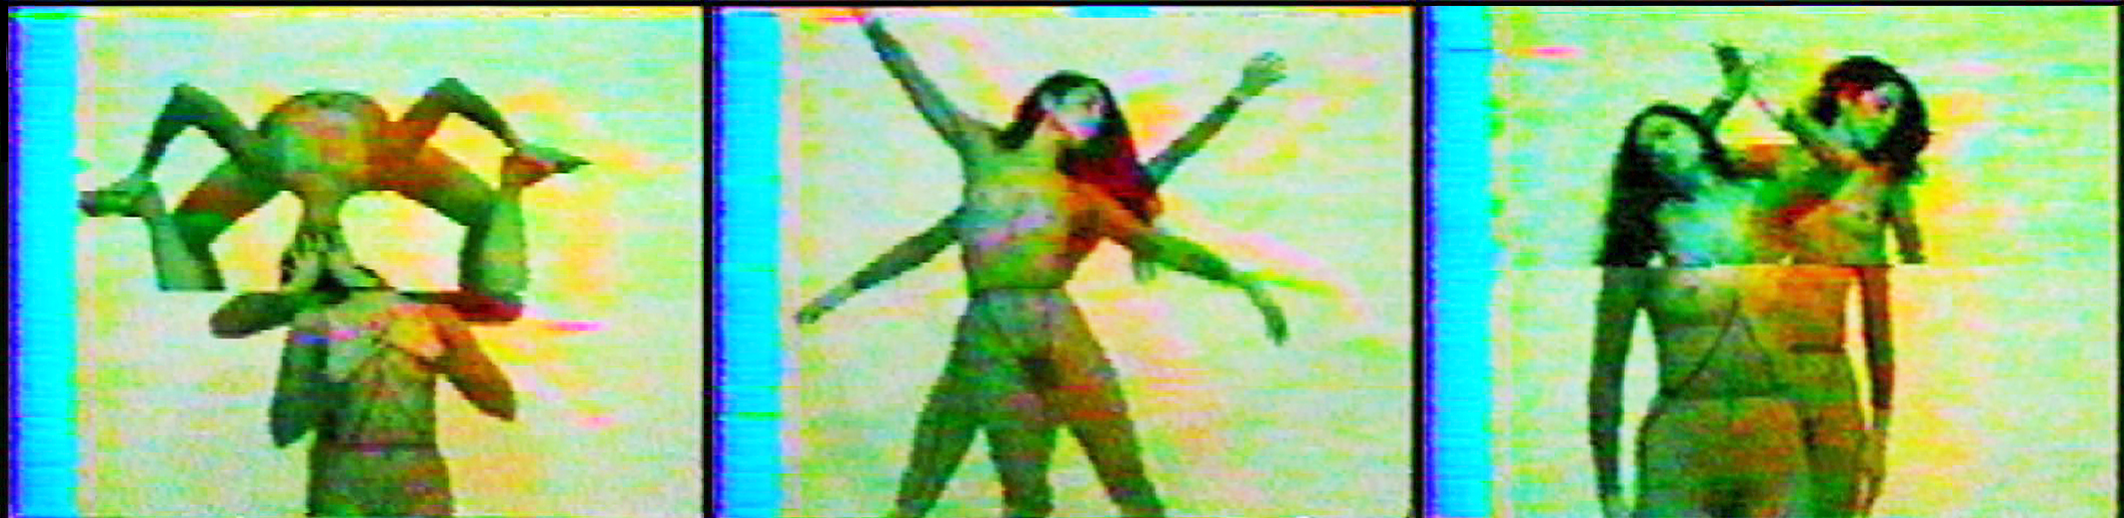 There are three clips of a video showing two dancers. The images are heavily pixelated.